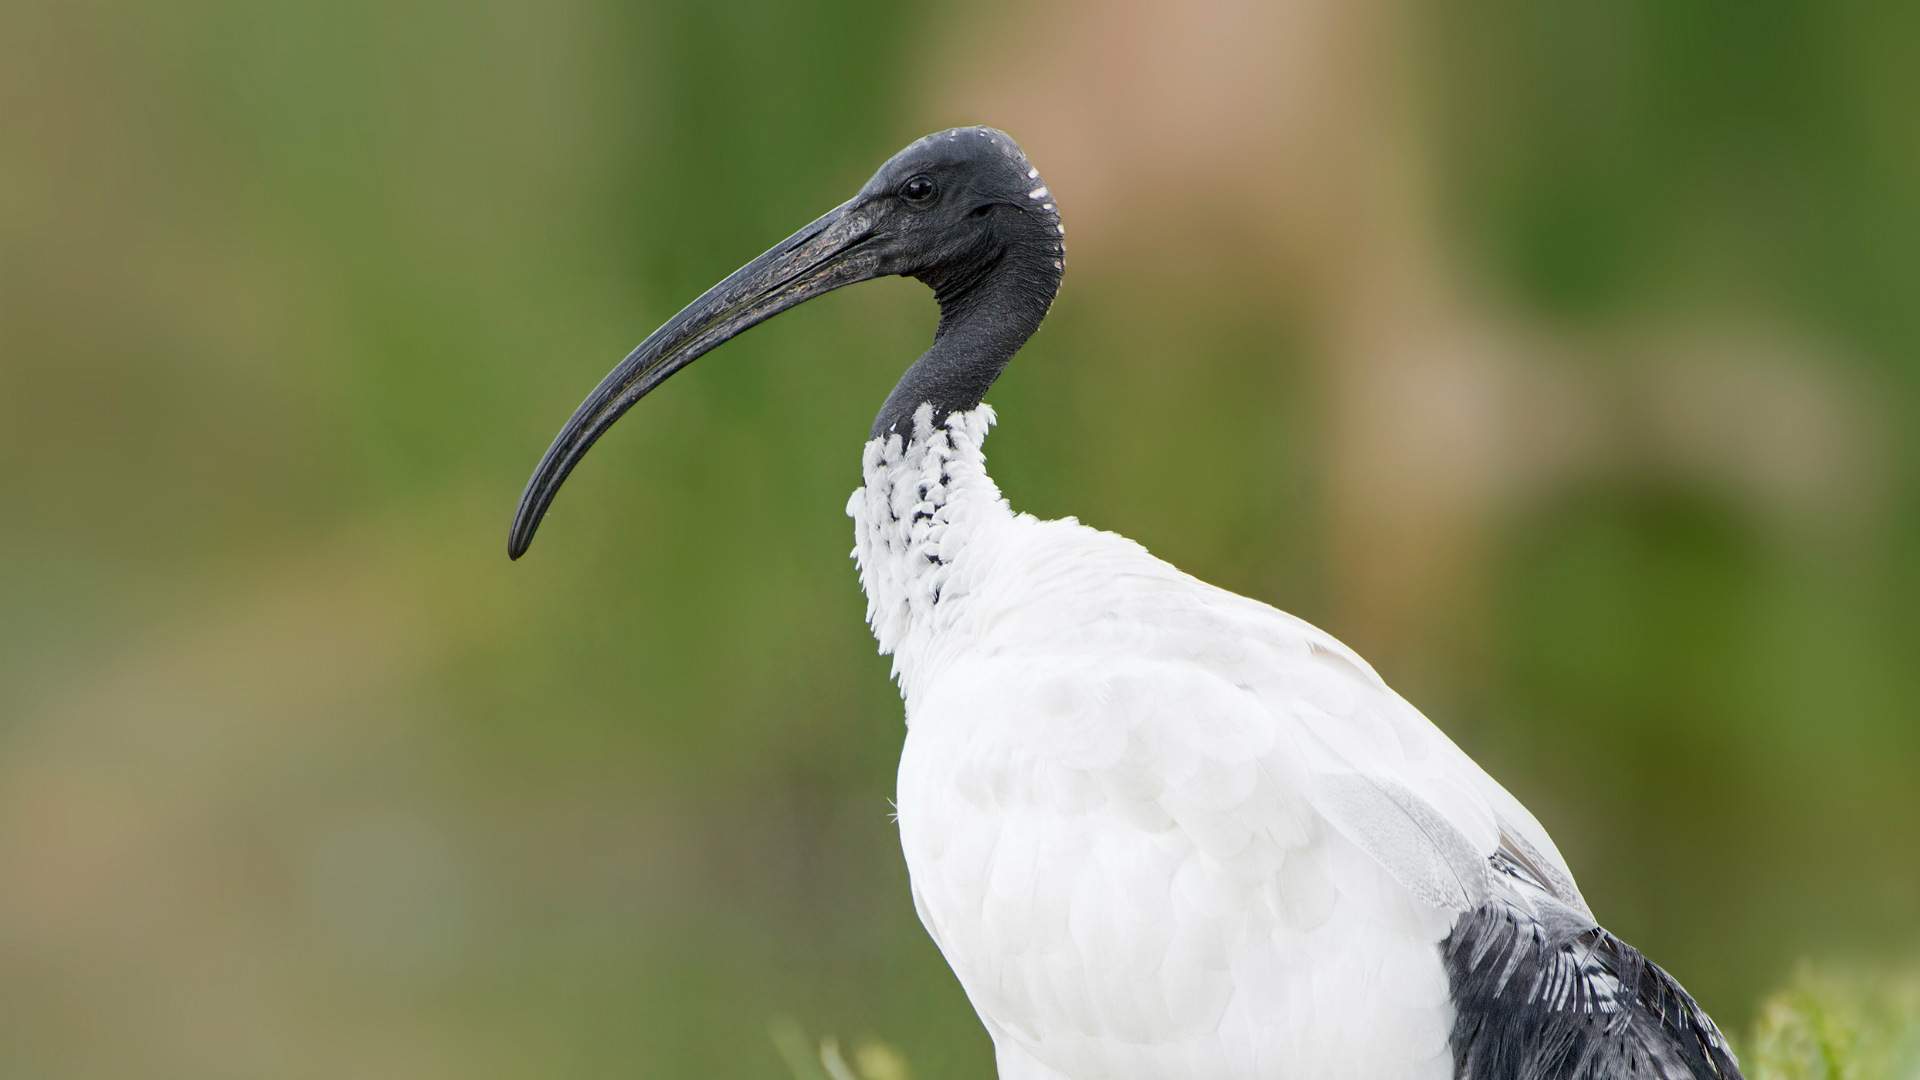 This Planet Earth-Like Ode to the Ibis Is the Positive Publicity Bin Chickens Yearn For